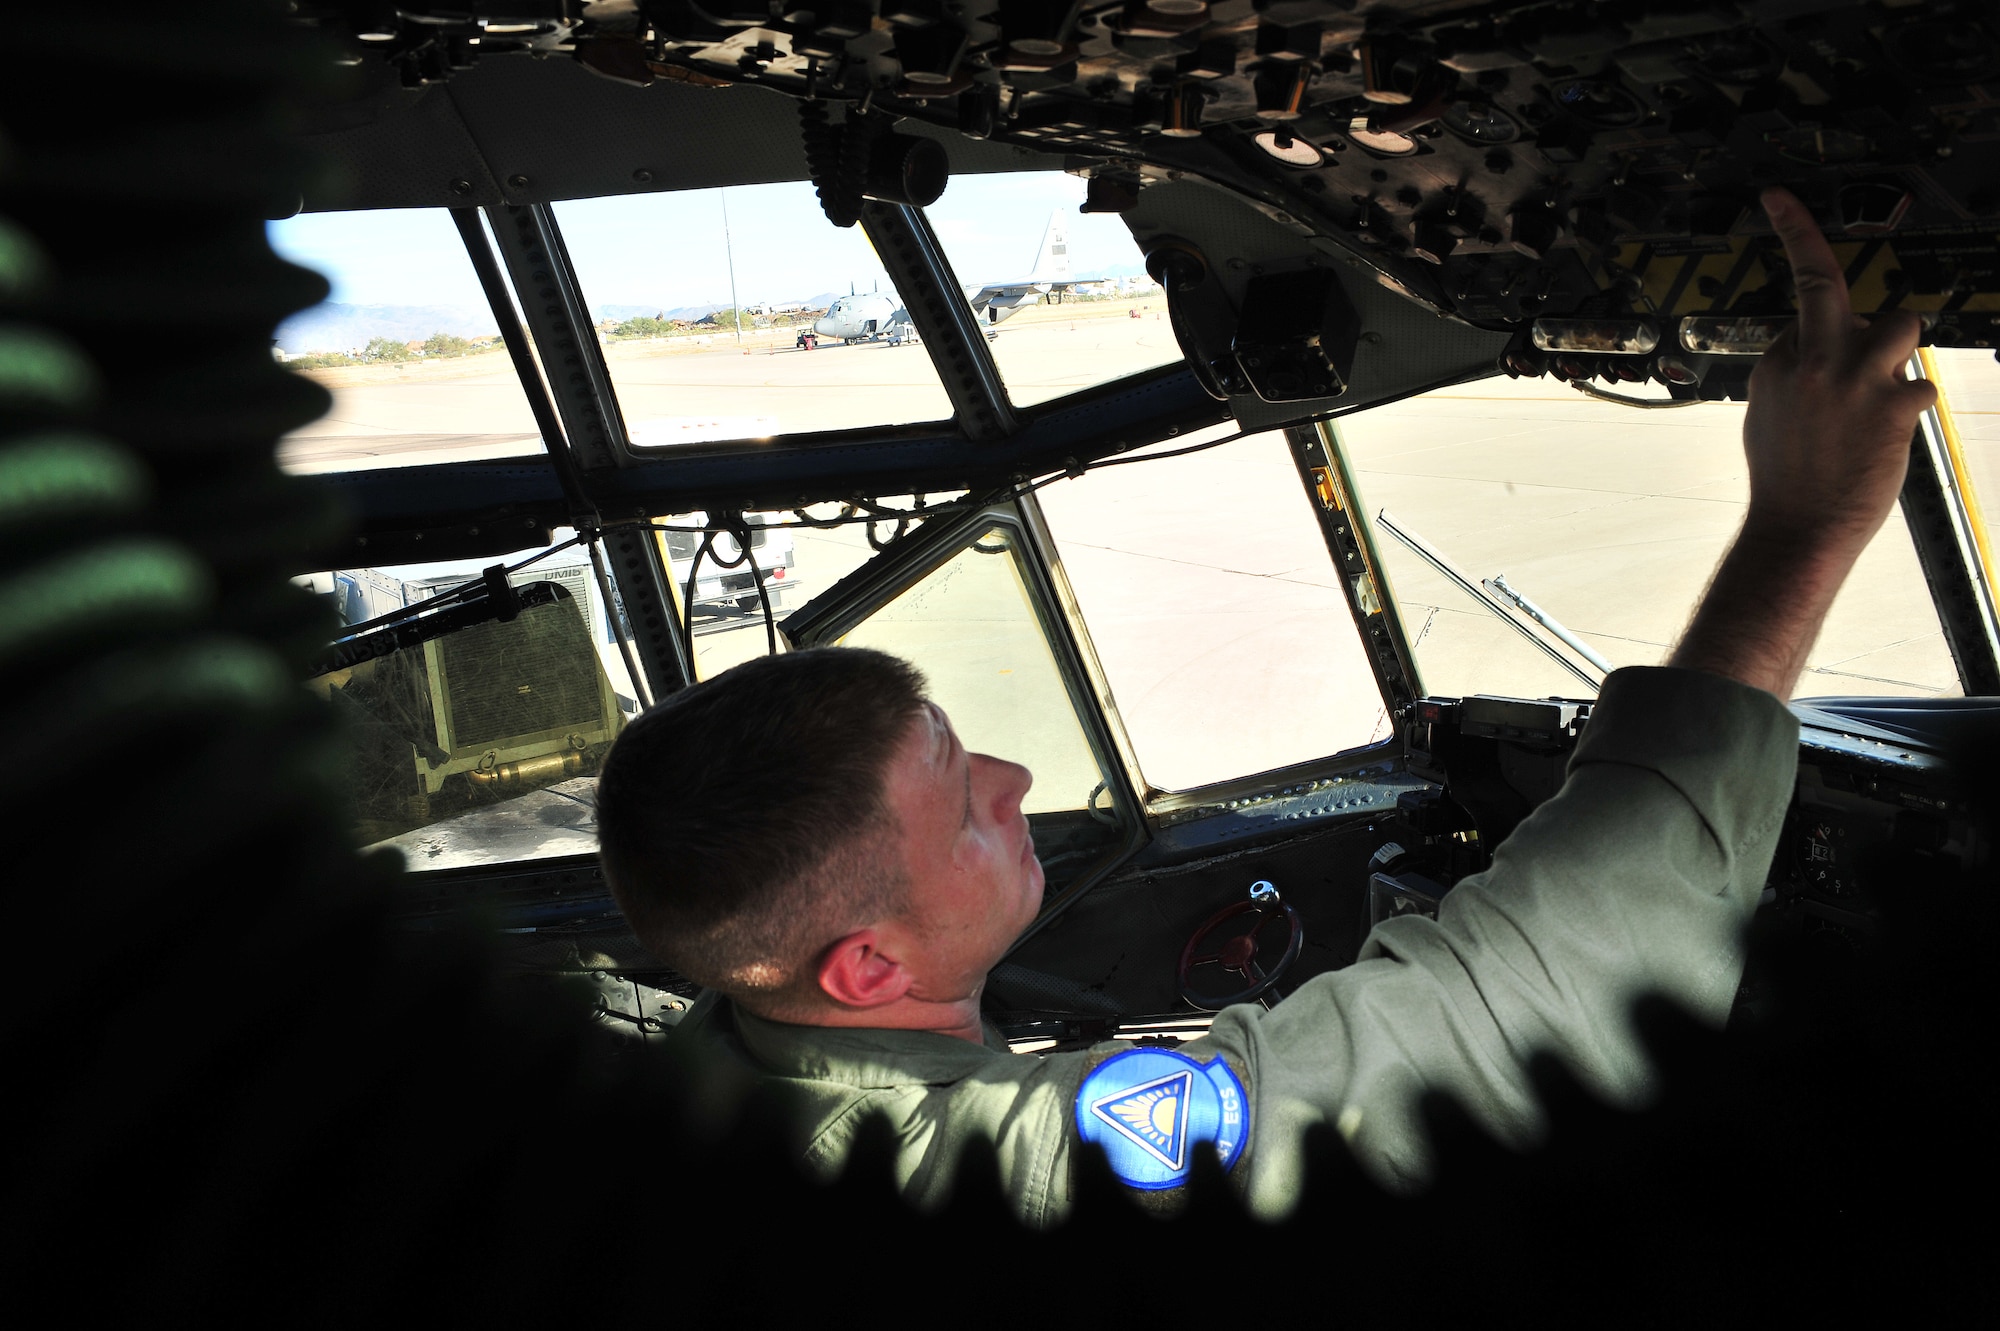 U.S. Air Force Senior Airman Chad Pugh, 41st Electronic Combat Squadron, goes through his preflight safety check on Davis-Monthan Air Force Base, Ariz., Oct. 15, 2012. Airman Pugh has a checklist he must go through to ensure safety throughout the flight. (U.S. Air Force photo by Airman 1st Class Josh Slavin/Released)